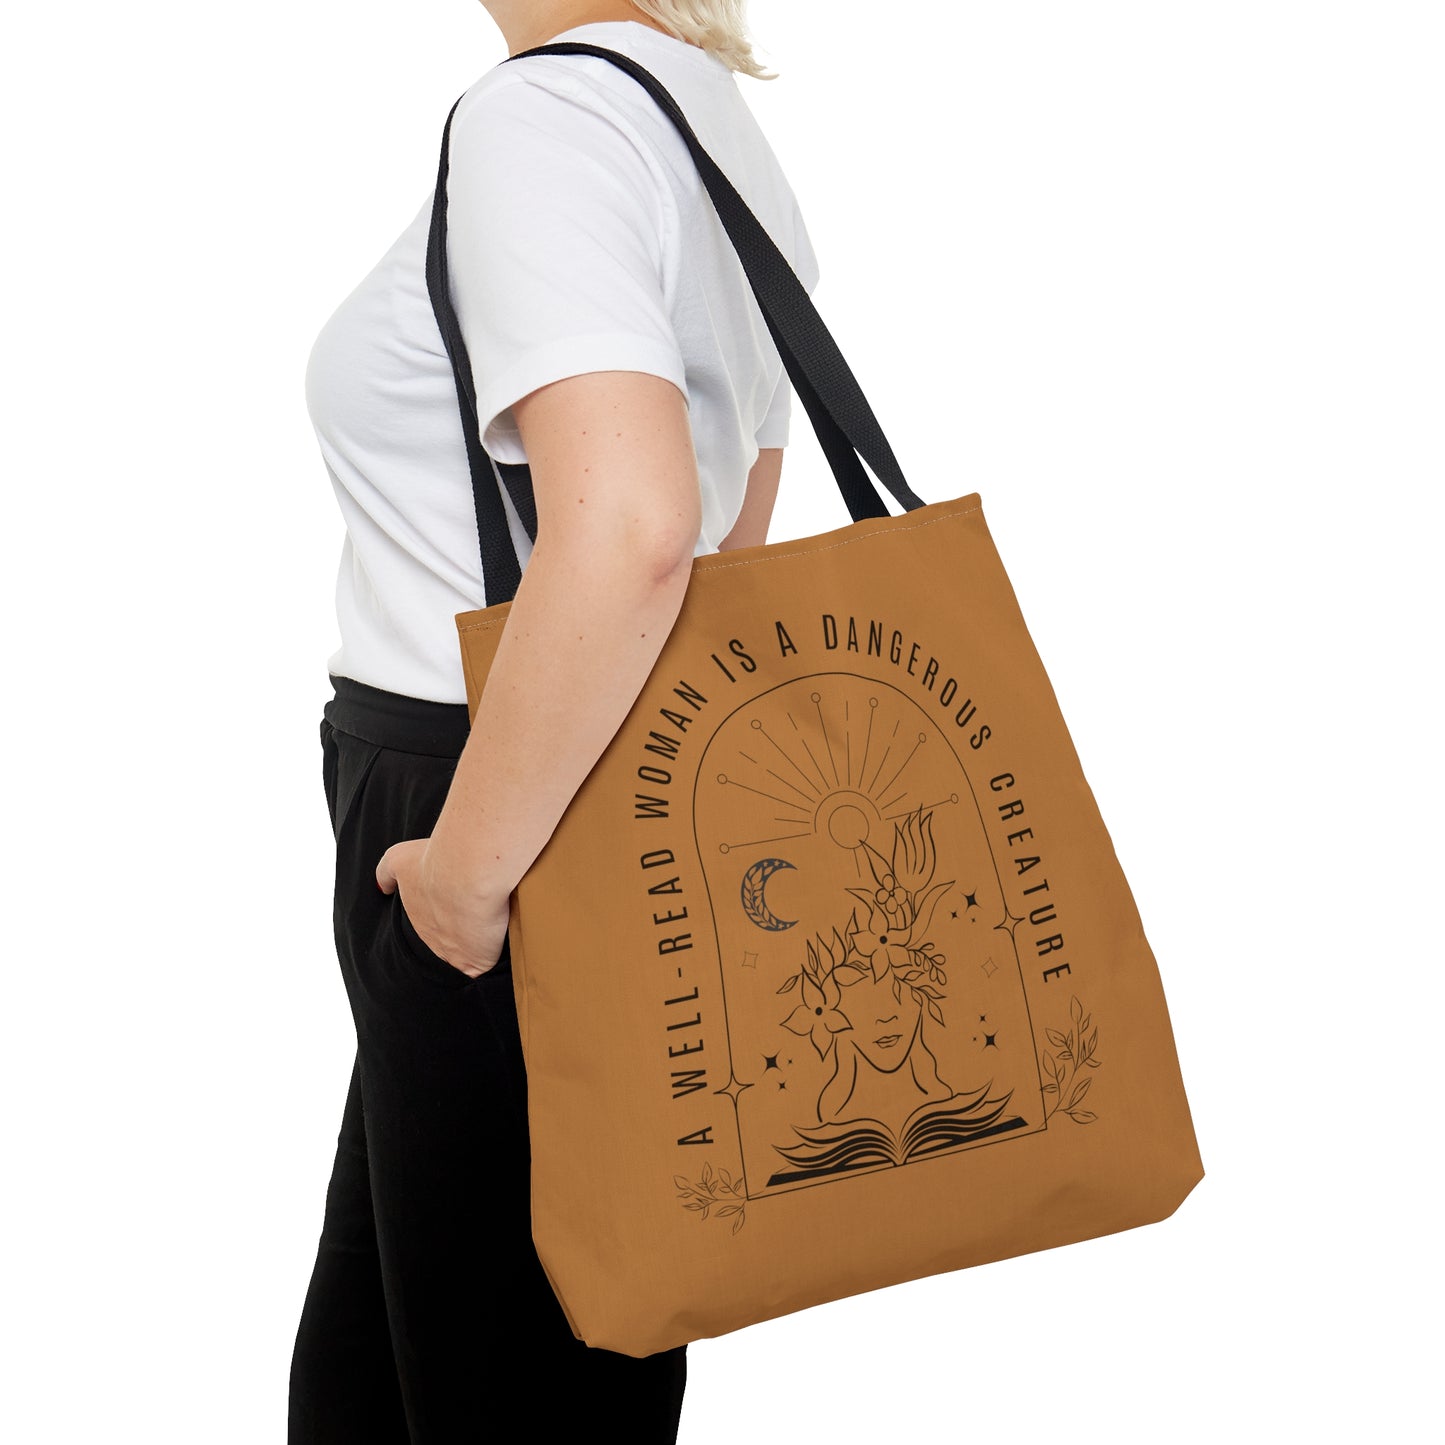 A Well-Read Woman is a Dangerous Creature LARGE Tote Bag